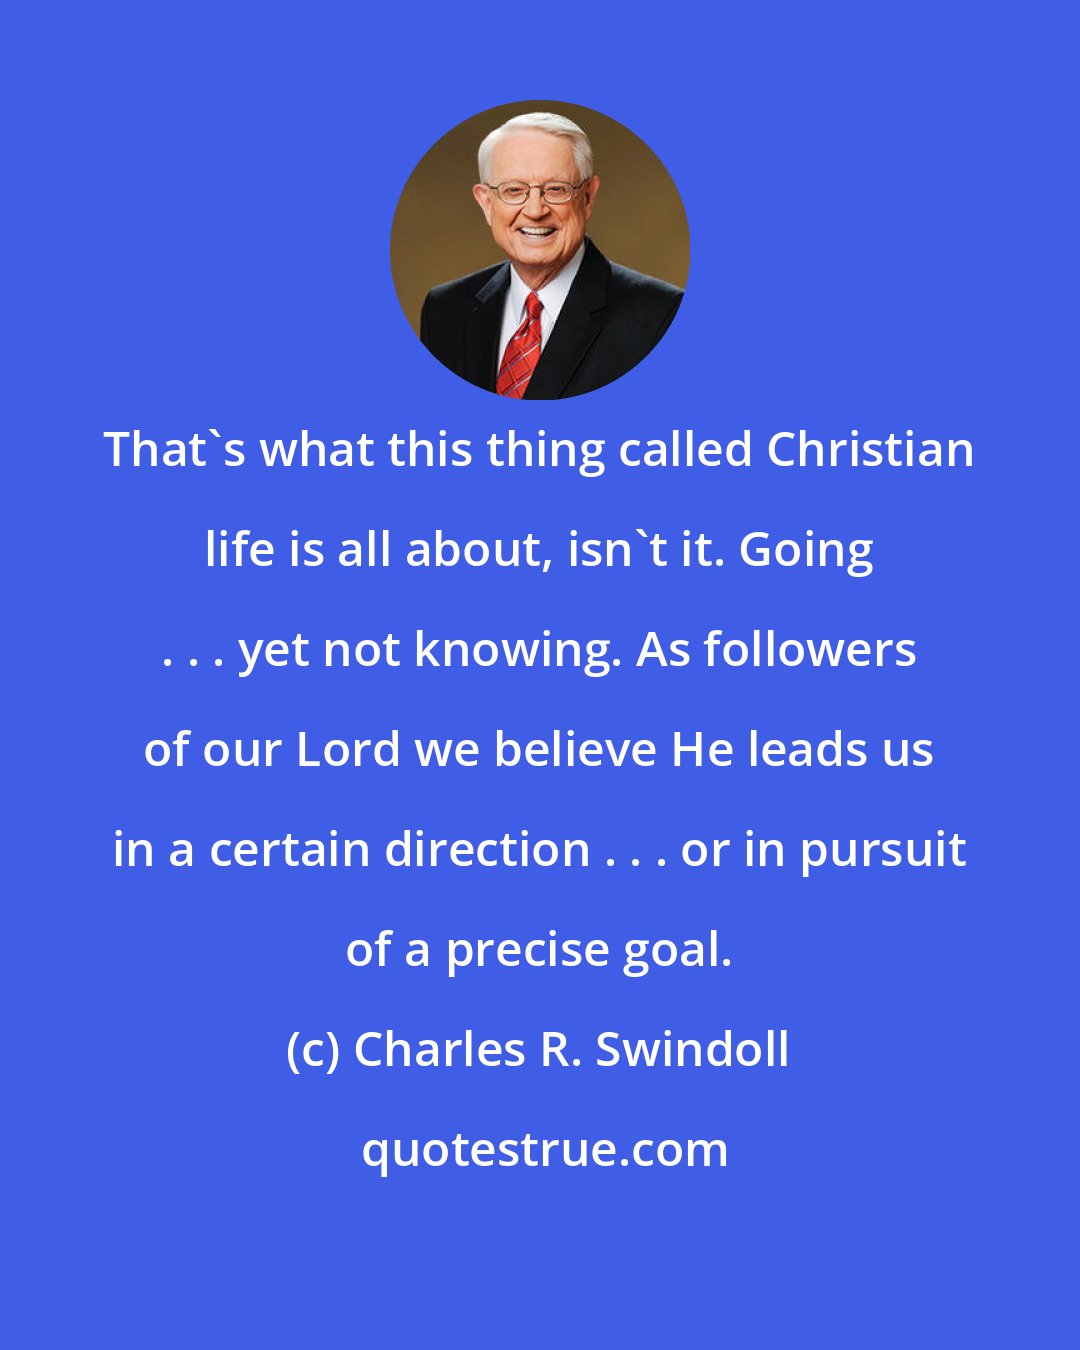 Charles R. Swindoll: That's what this thing called Christian life is all about, isn't it. Going . . . yet not knowing. As followers of our Lord we believe He leads us in a certain direction . . . or in pursuit of a precise goal.